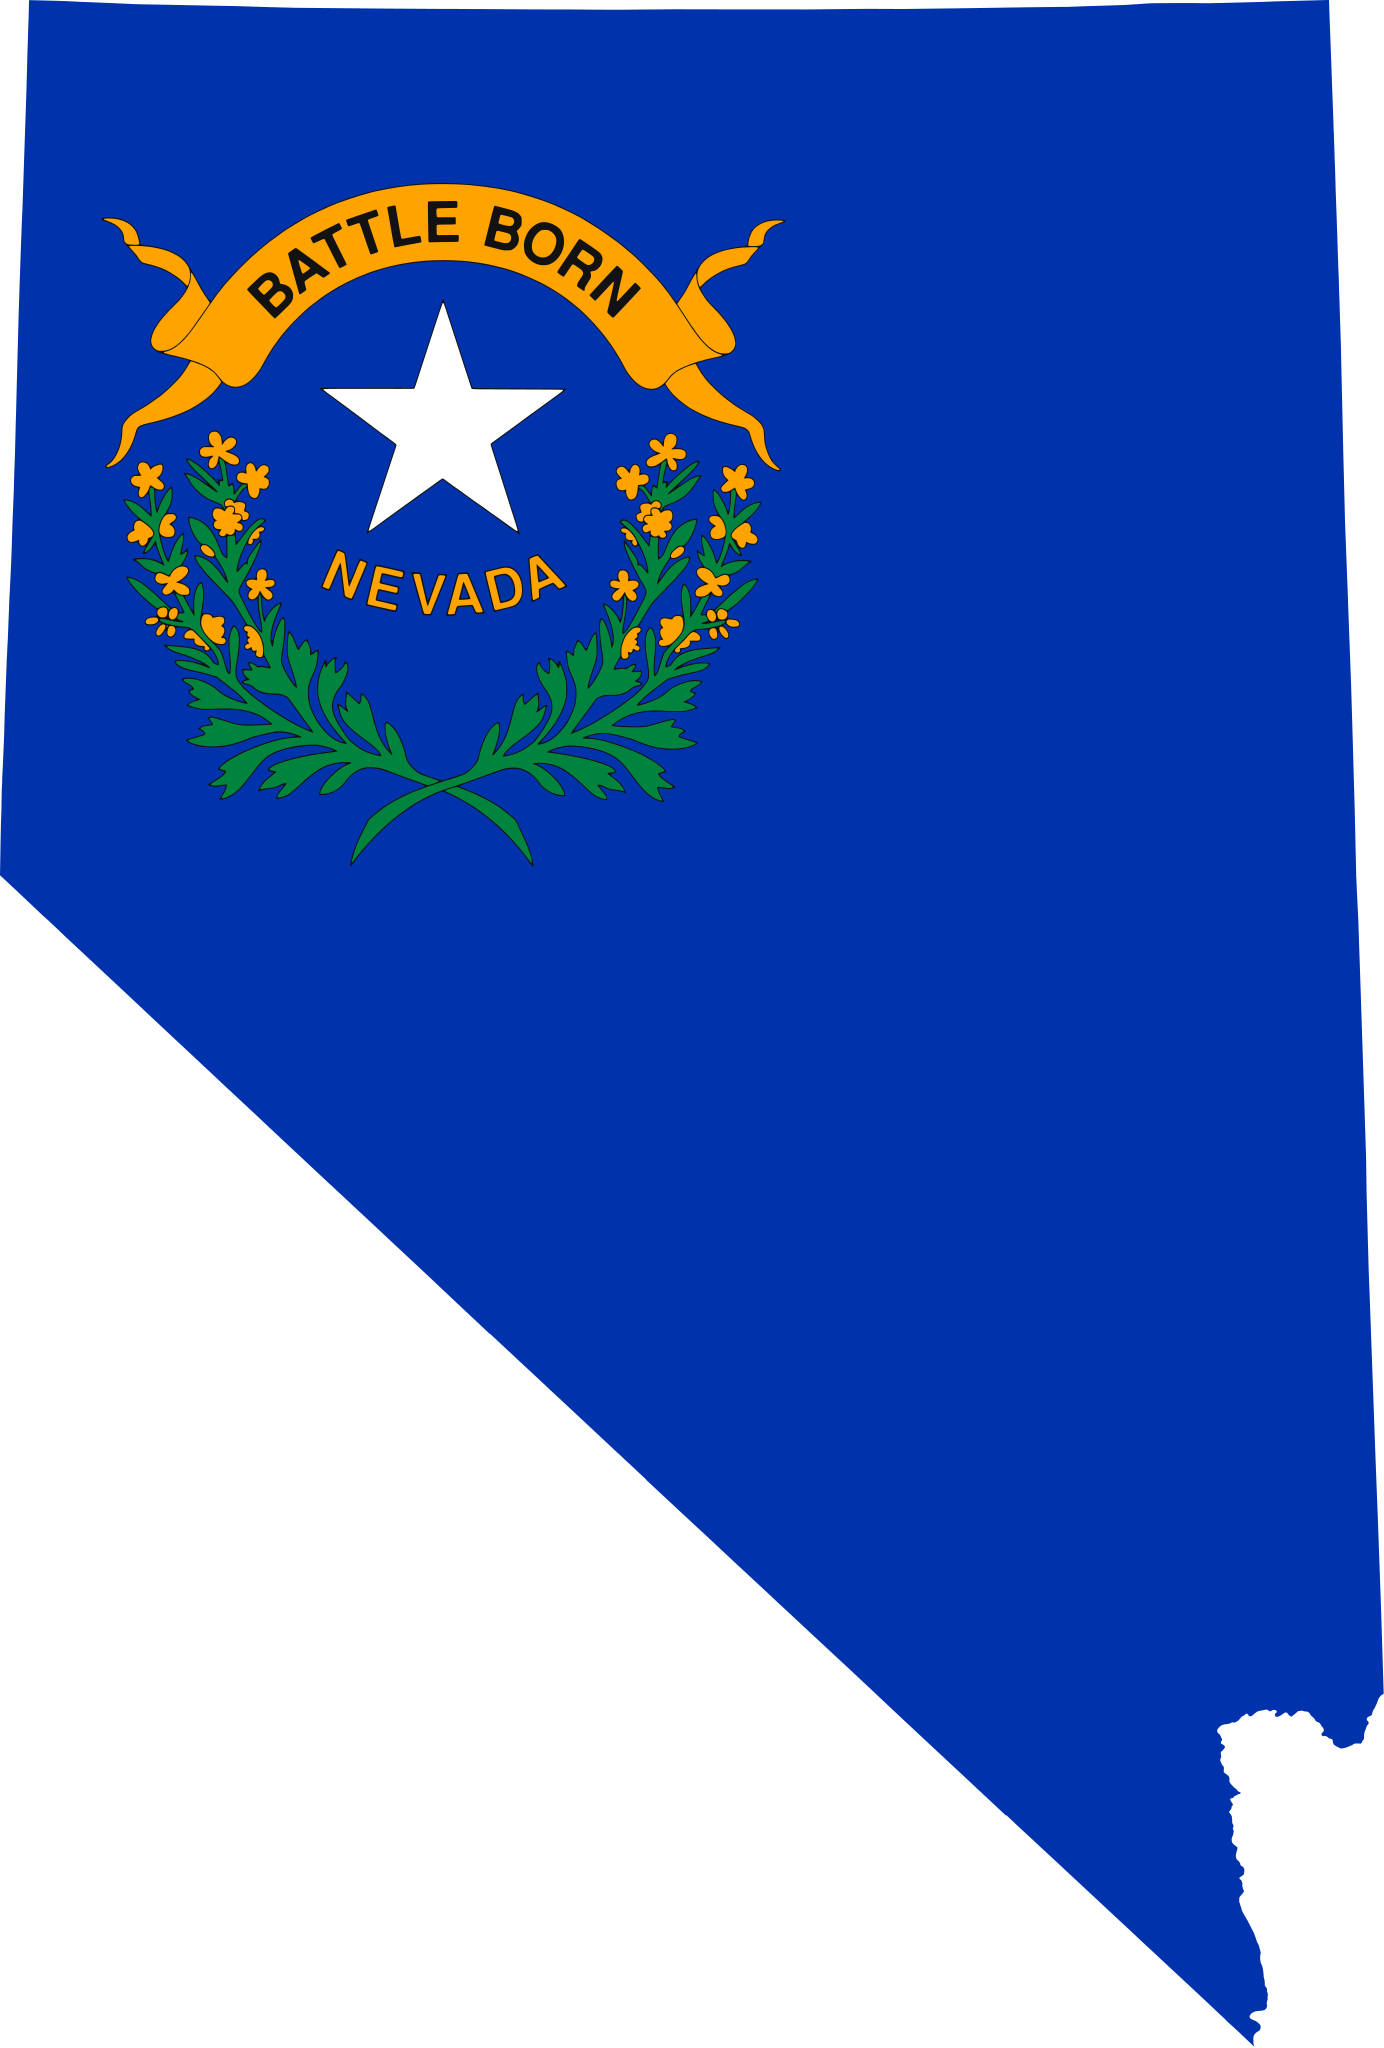 Office building with a Nevada state flag